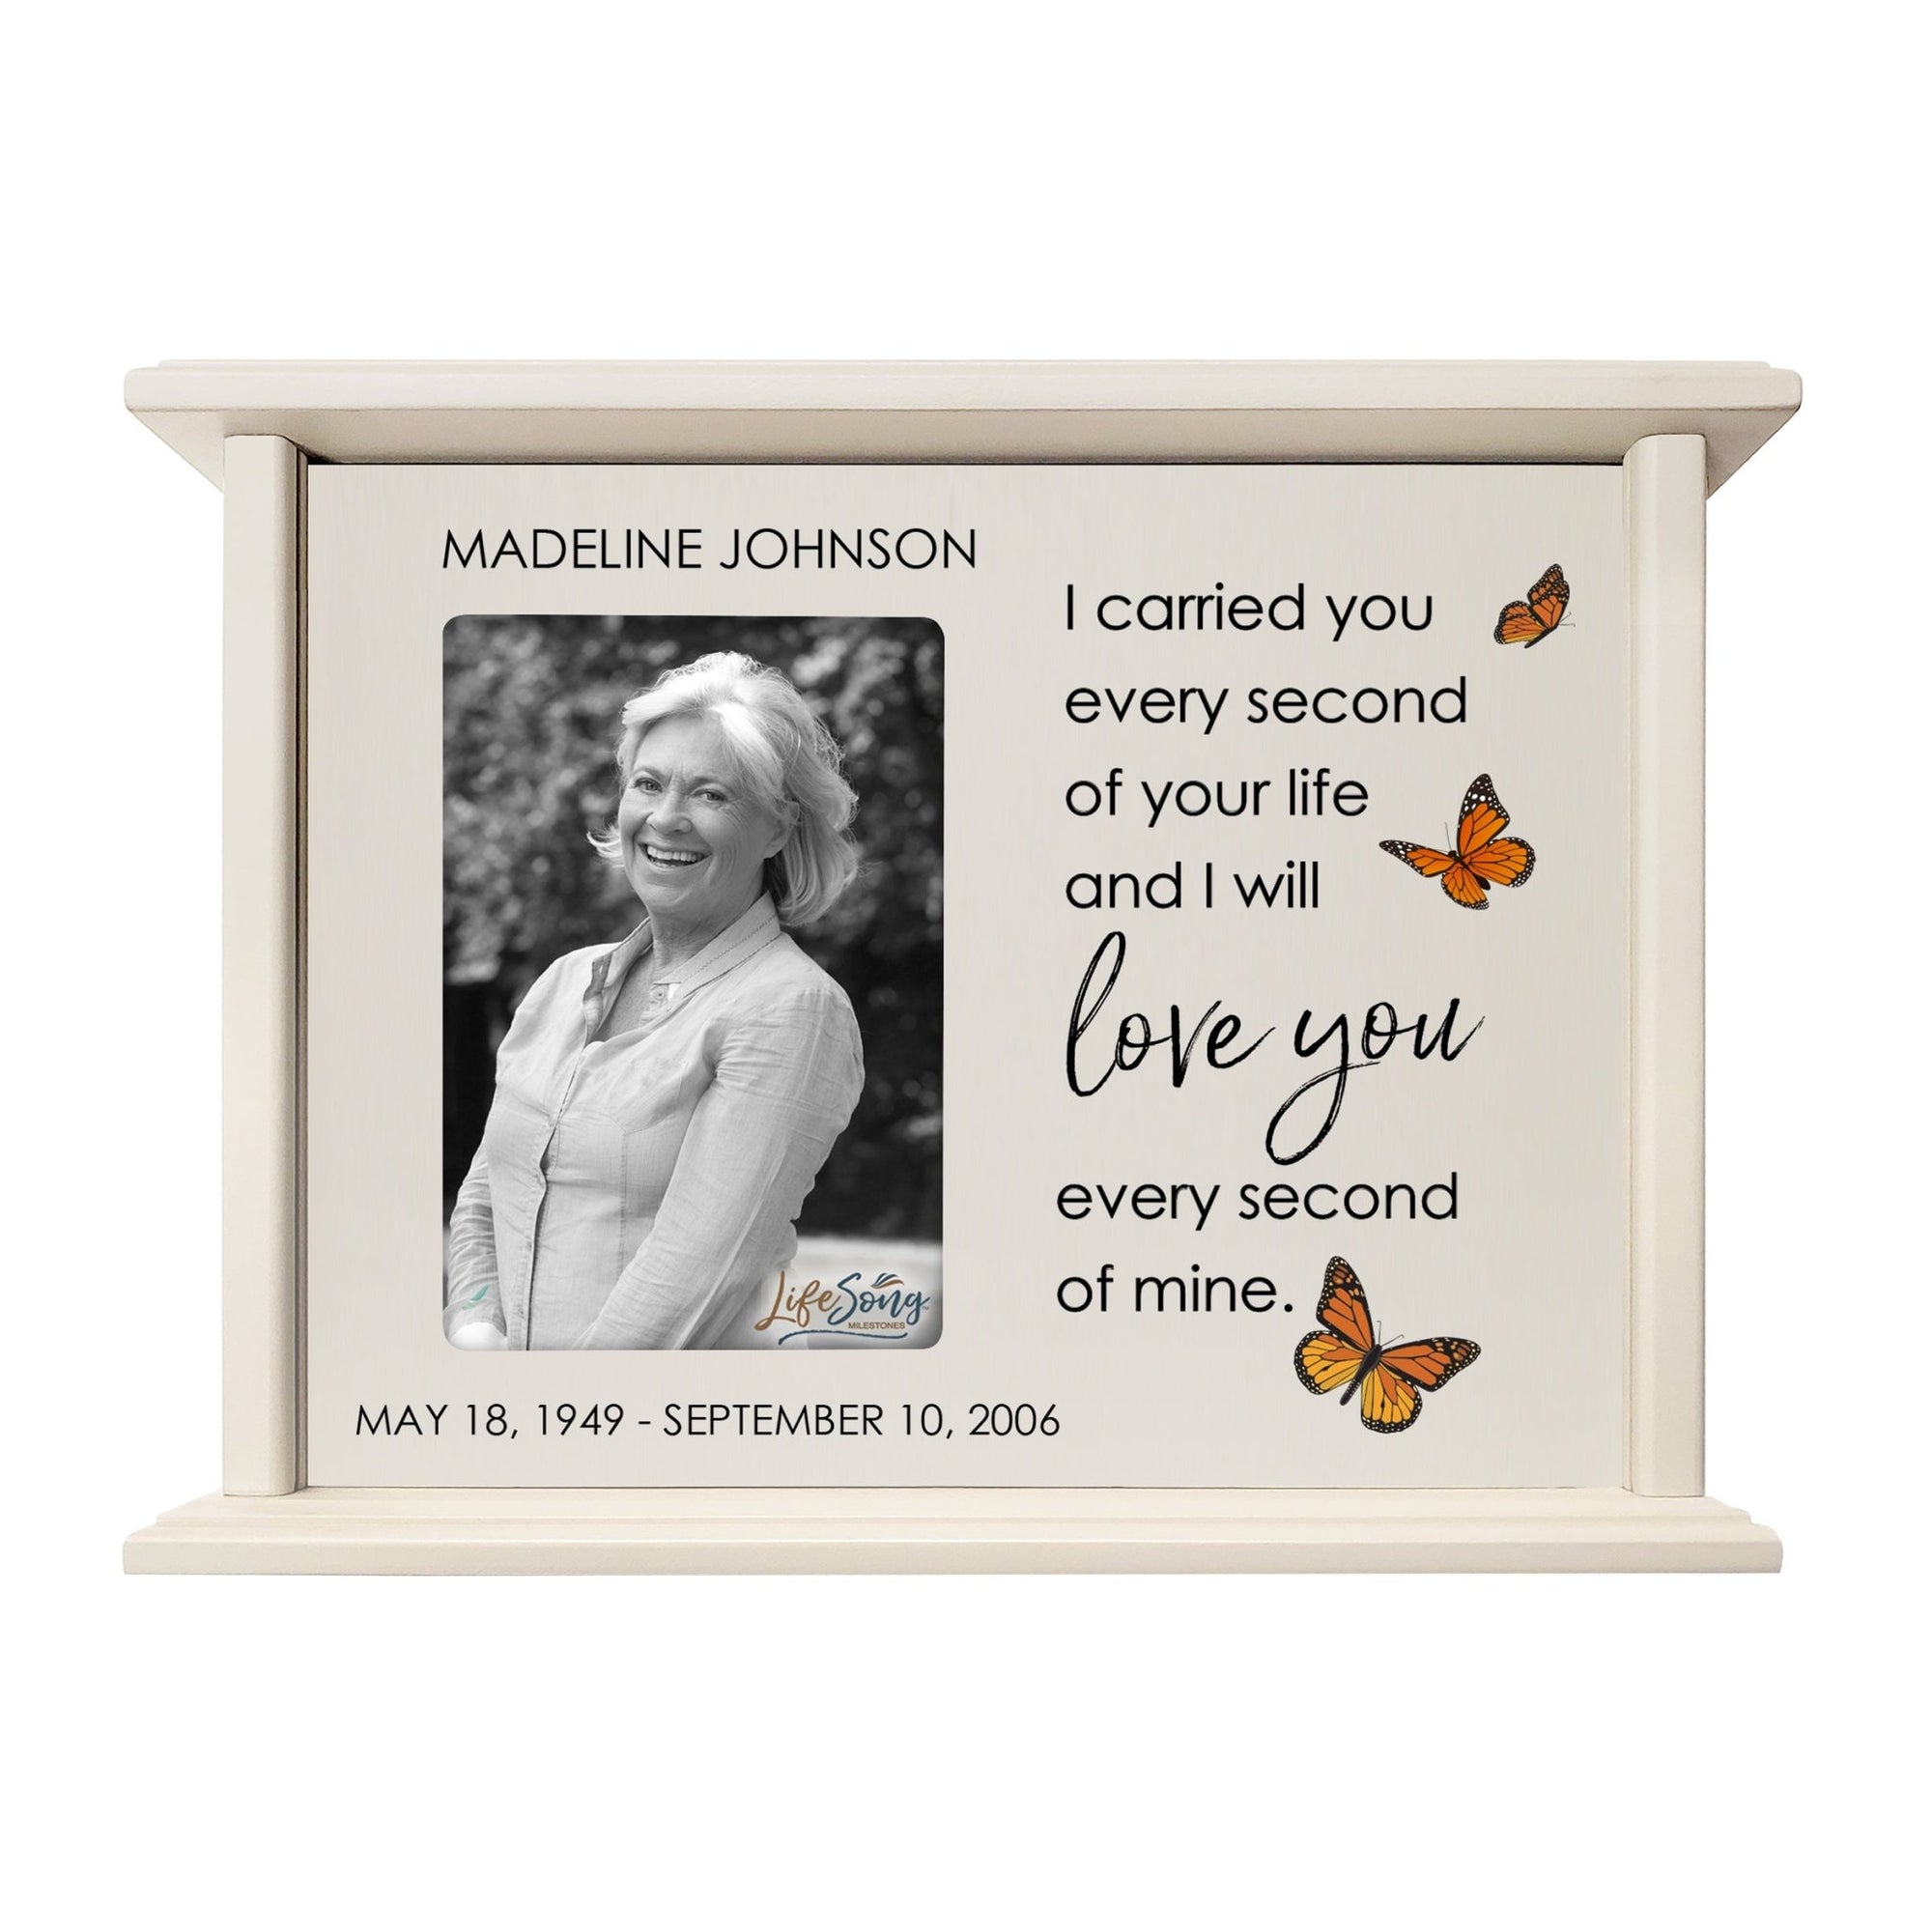 Personalized Memorial Cherry Wood 12 x 4.5 x 9 Cremation Urn Box with Picture Frame holds 200 cu in of Human Ashes and 4x6 Photo - I Carried You Every Second (Ivory) - LifeSong Milestones